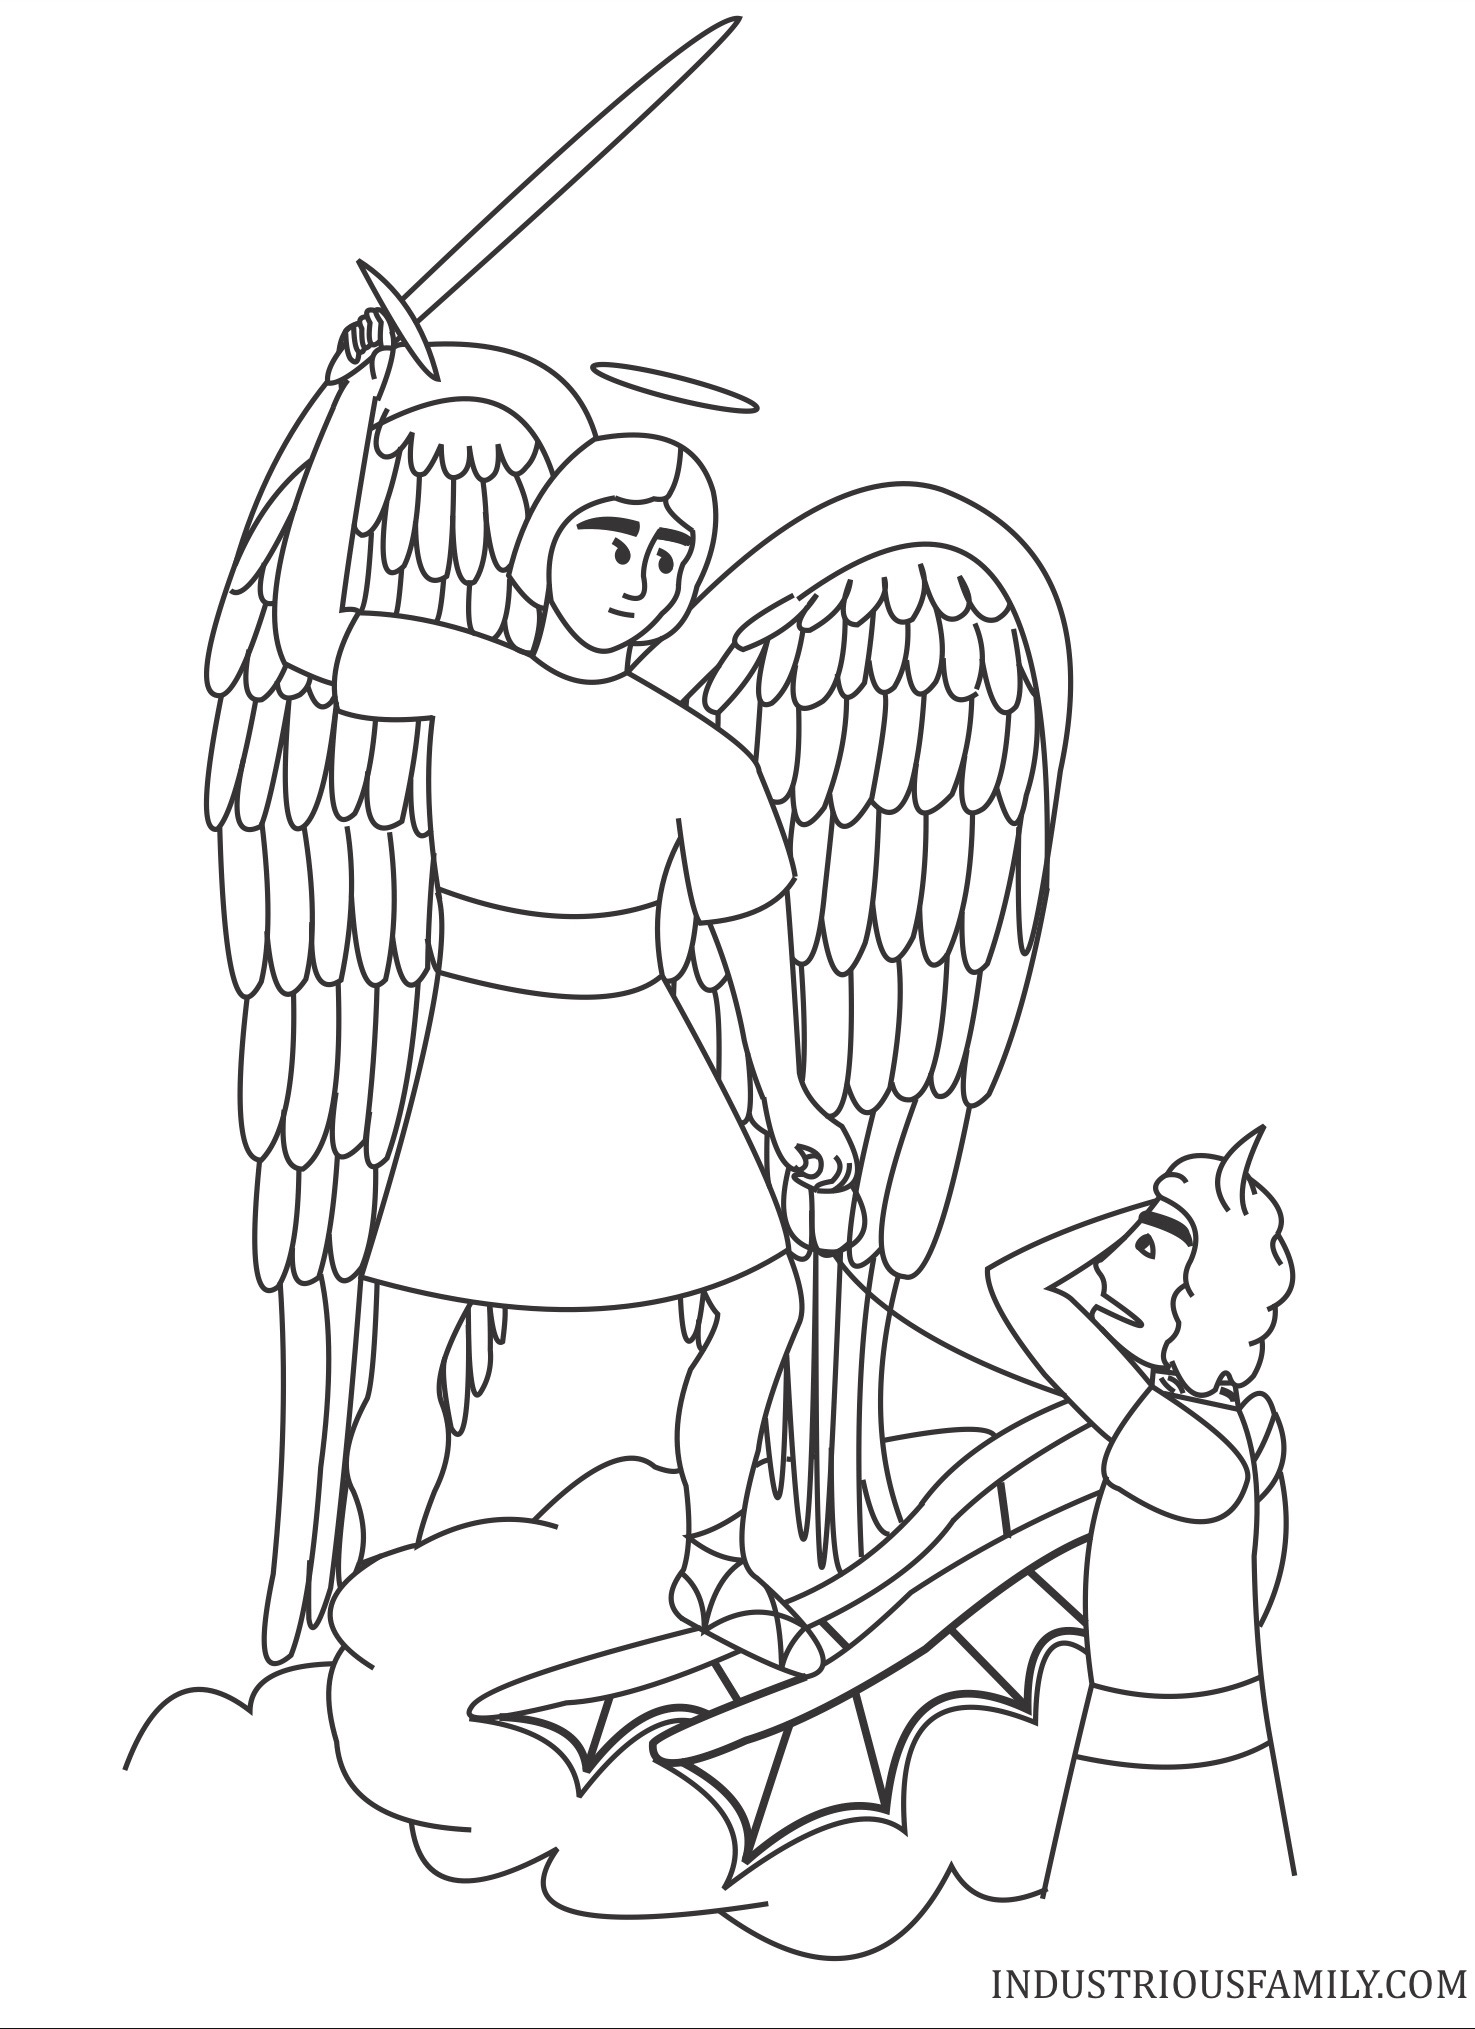 Satan 10 For Kids Coloring Page